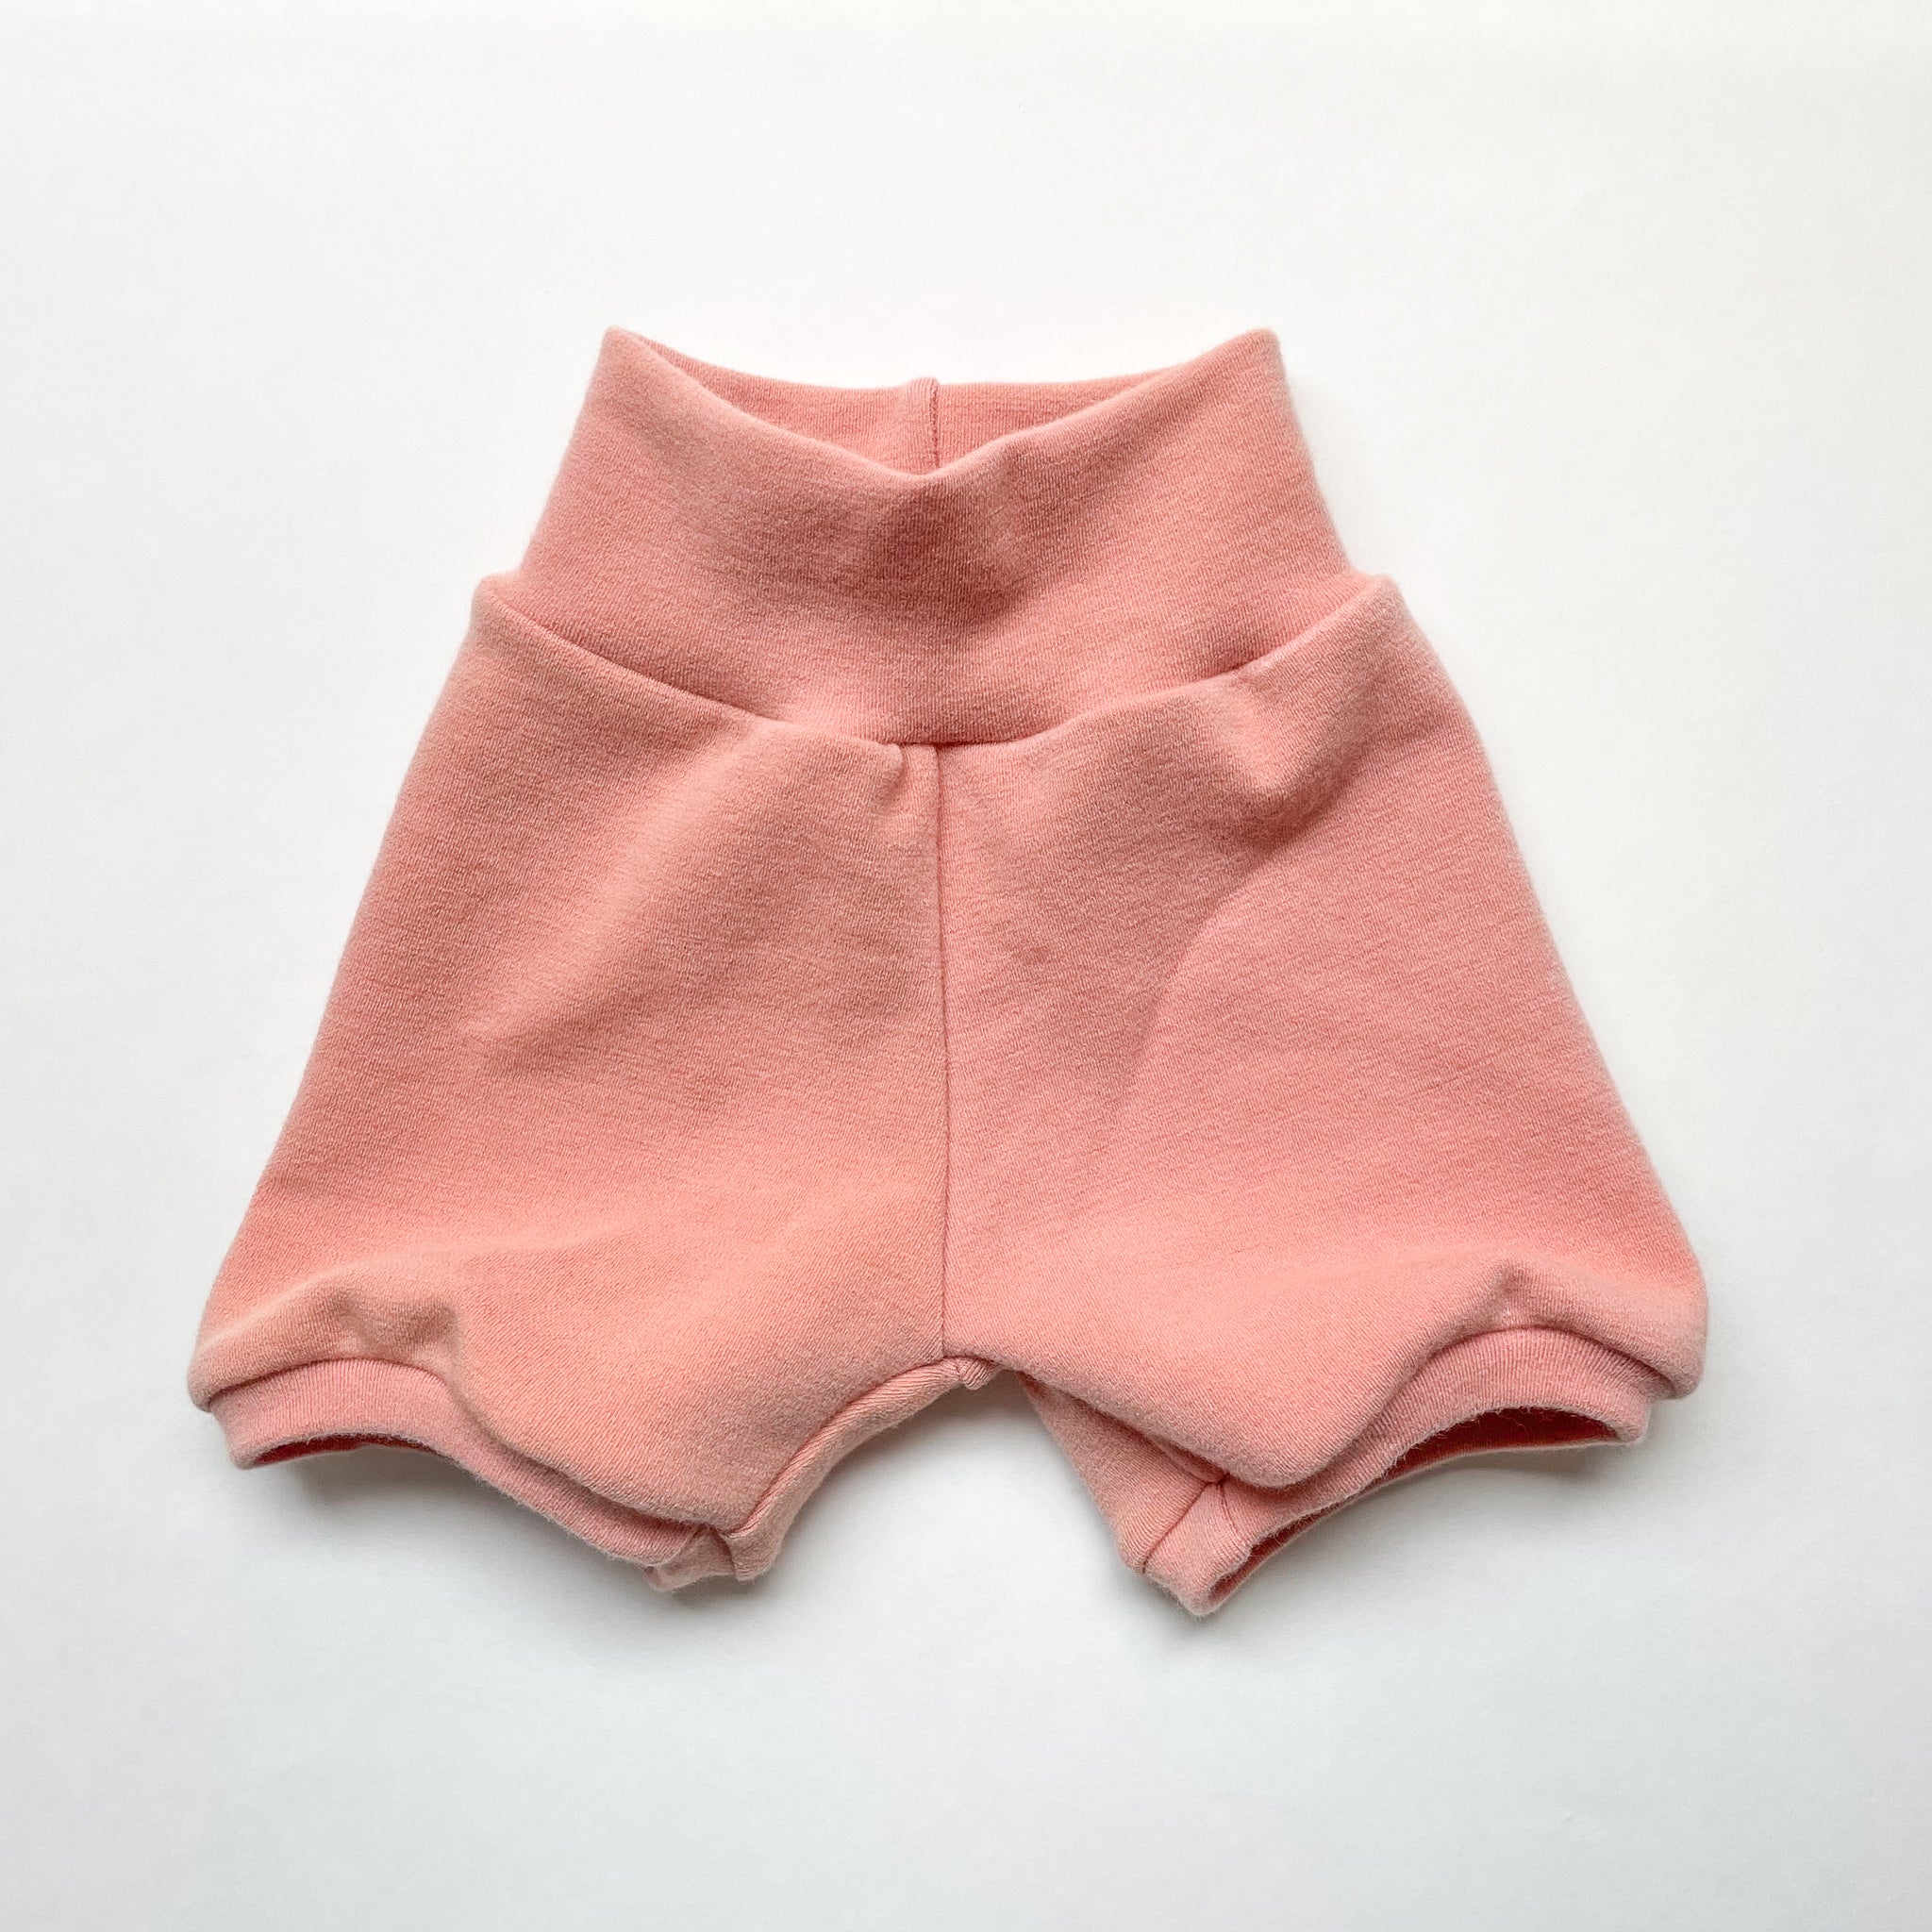 Wool Shorts | choose from 5 colors | cuffed or hemmed leg